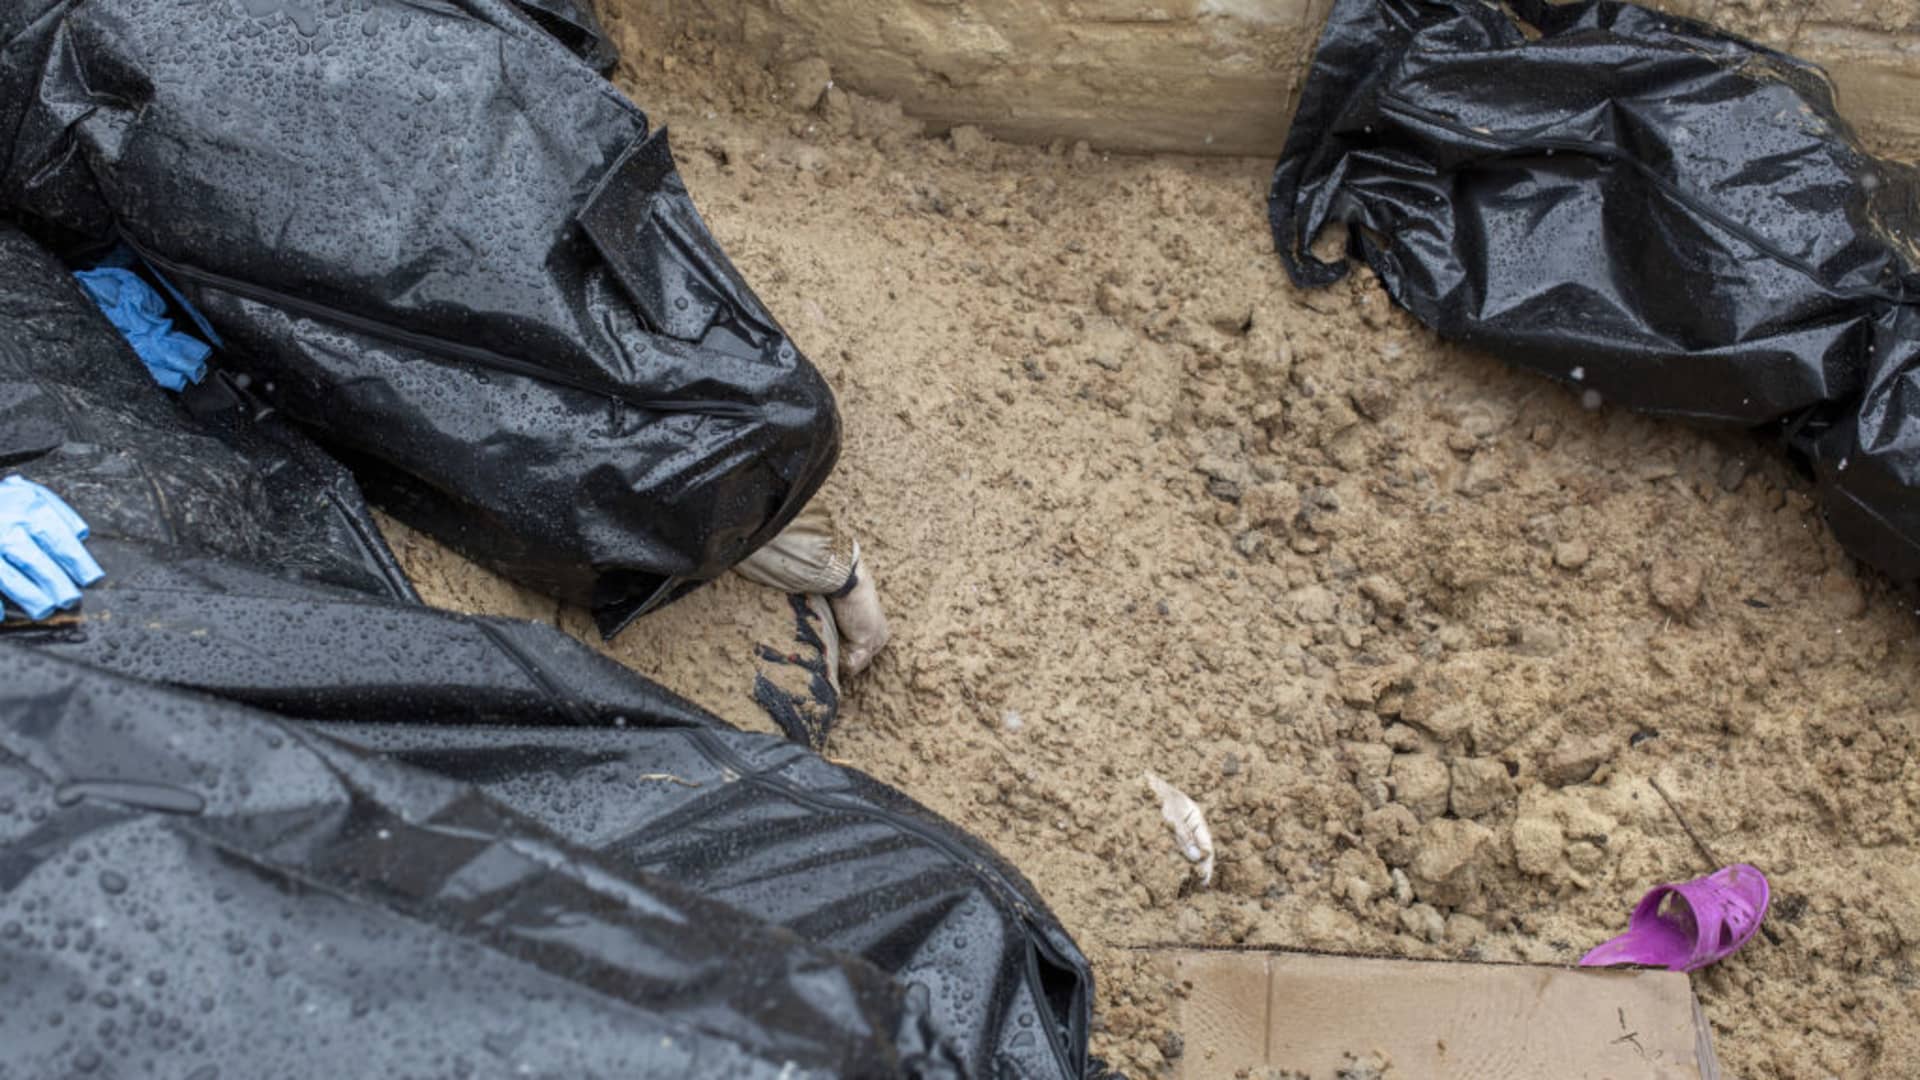 (EDITOR'S NOTE: Image depicts death) A partially buried body is seen in a mass grave in the town of Bucha, on the outskirts of Kyiv, after the Ukrainian army secured the area following the withdrawal of the Russian army from the Kyiv region on previous days, Bucha, Ukraine on April 03, 2022.